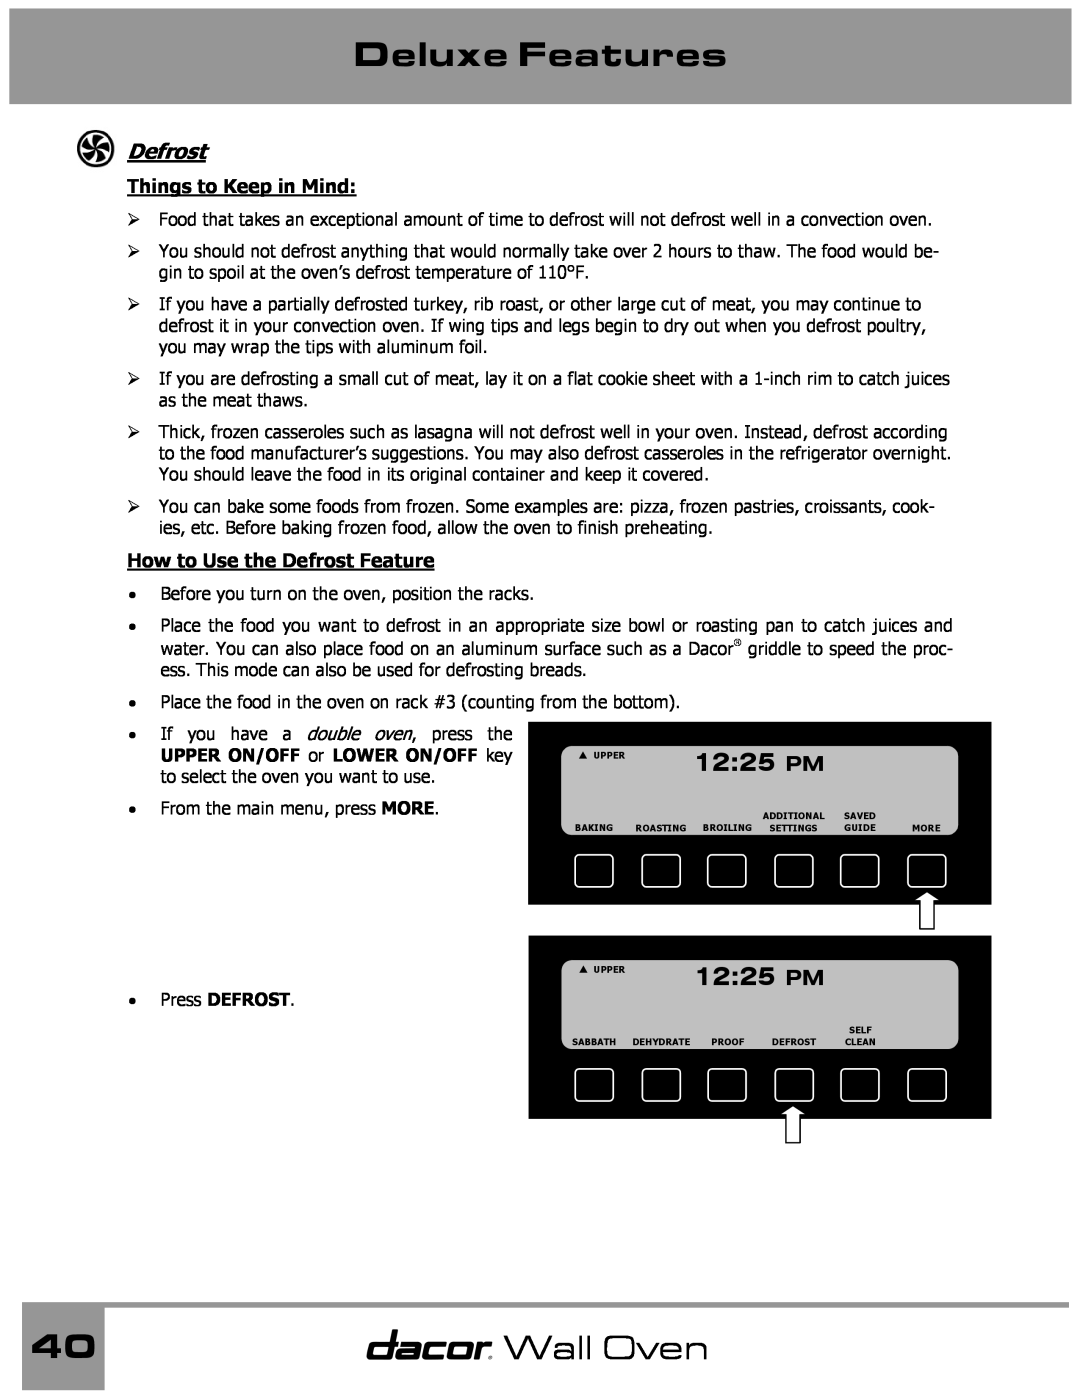 Dacor Wall Oven manual Things to Keep in Mind, How to Use the Defrost Feature, Deluxe Features, 1225 PM, Press DEFROST 